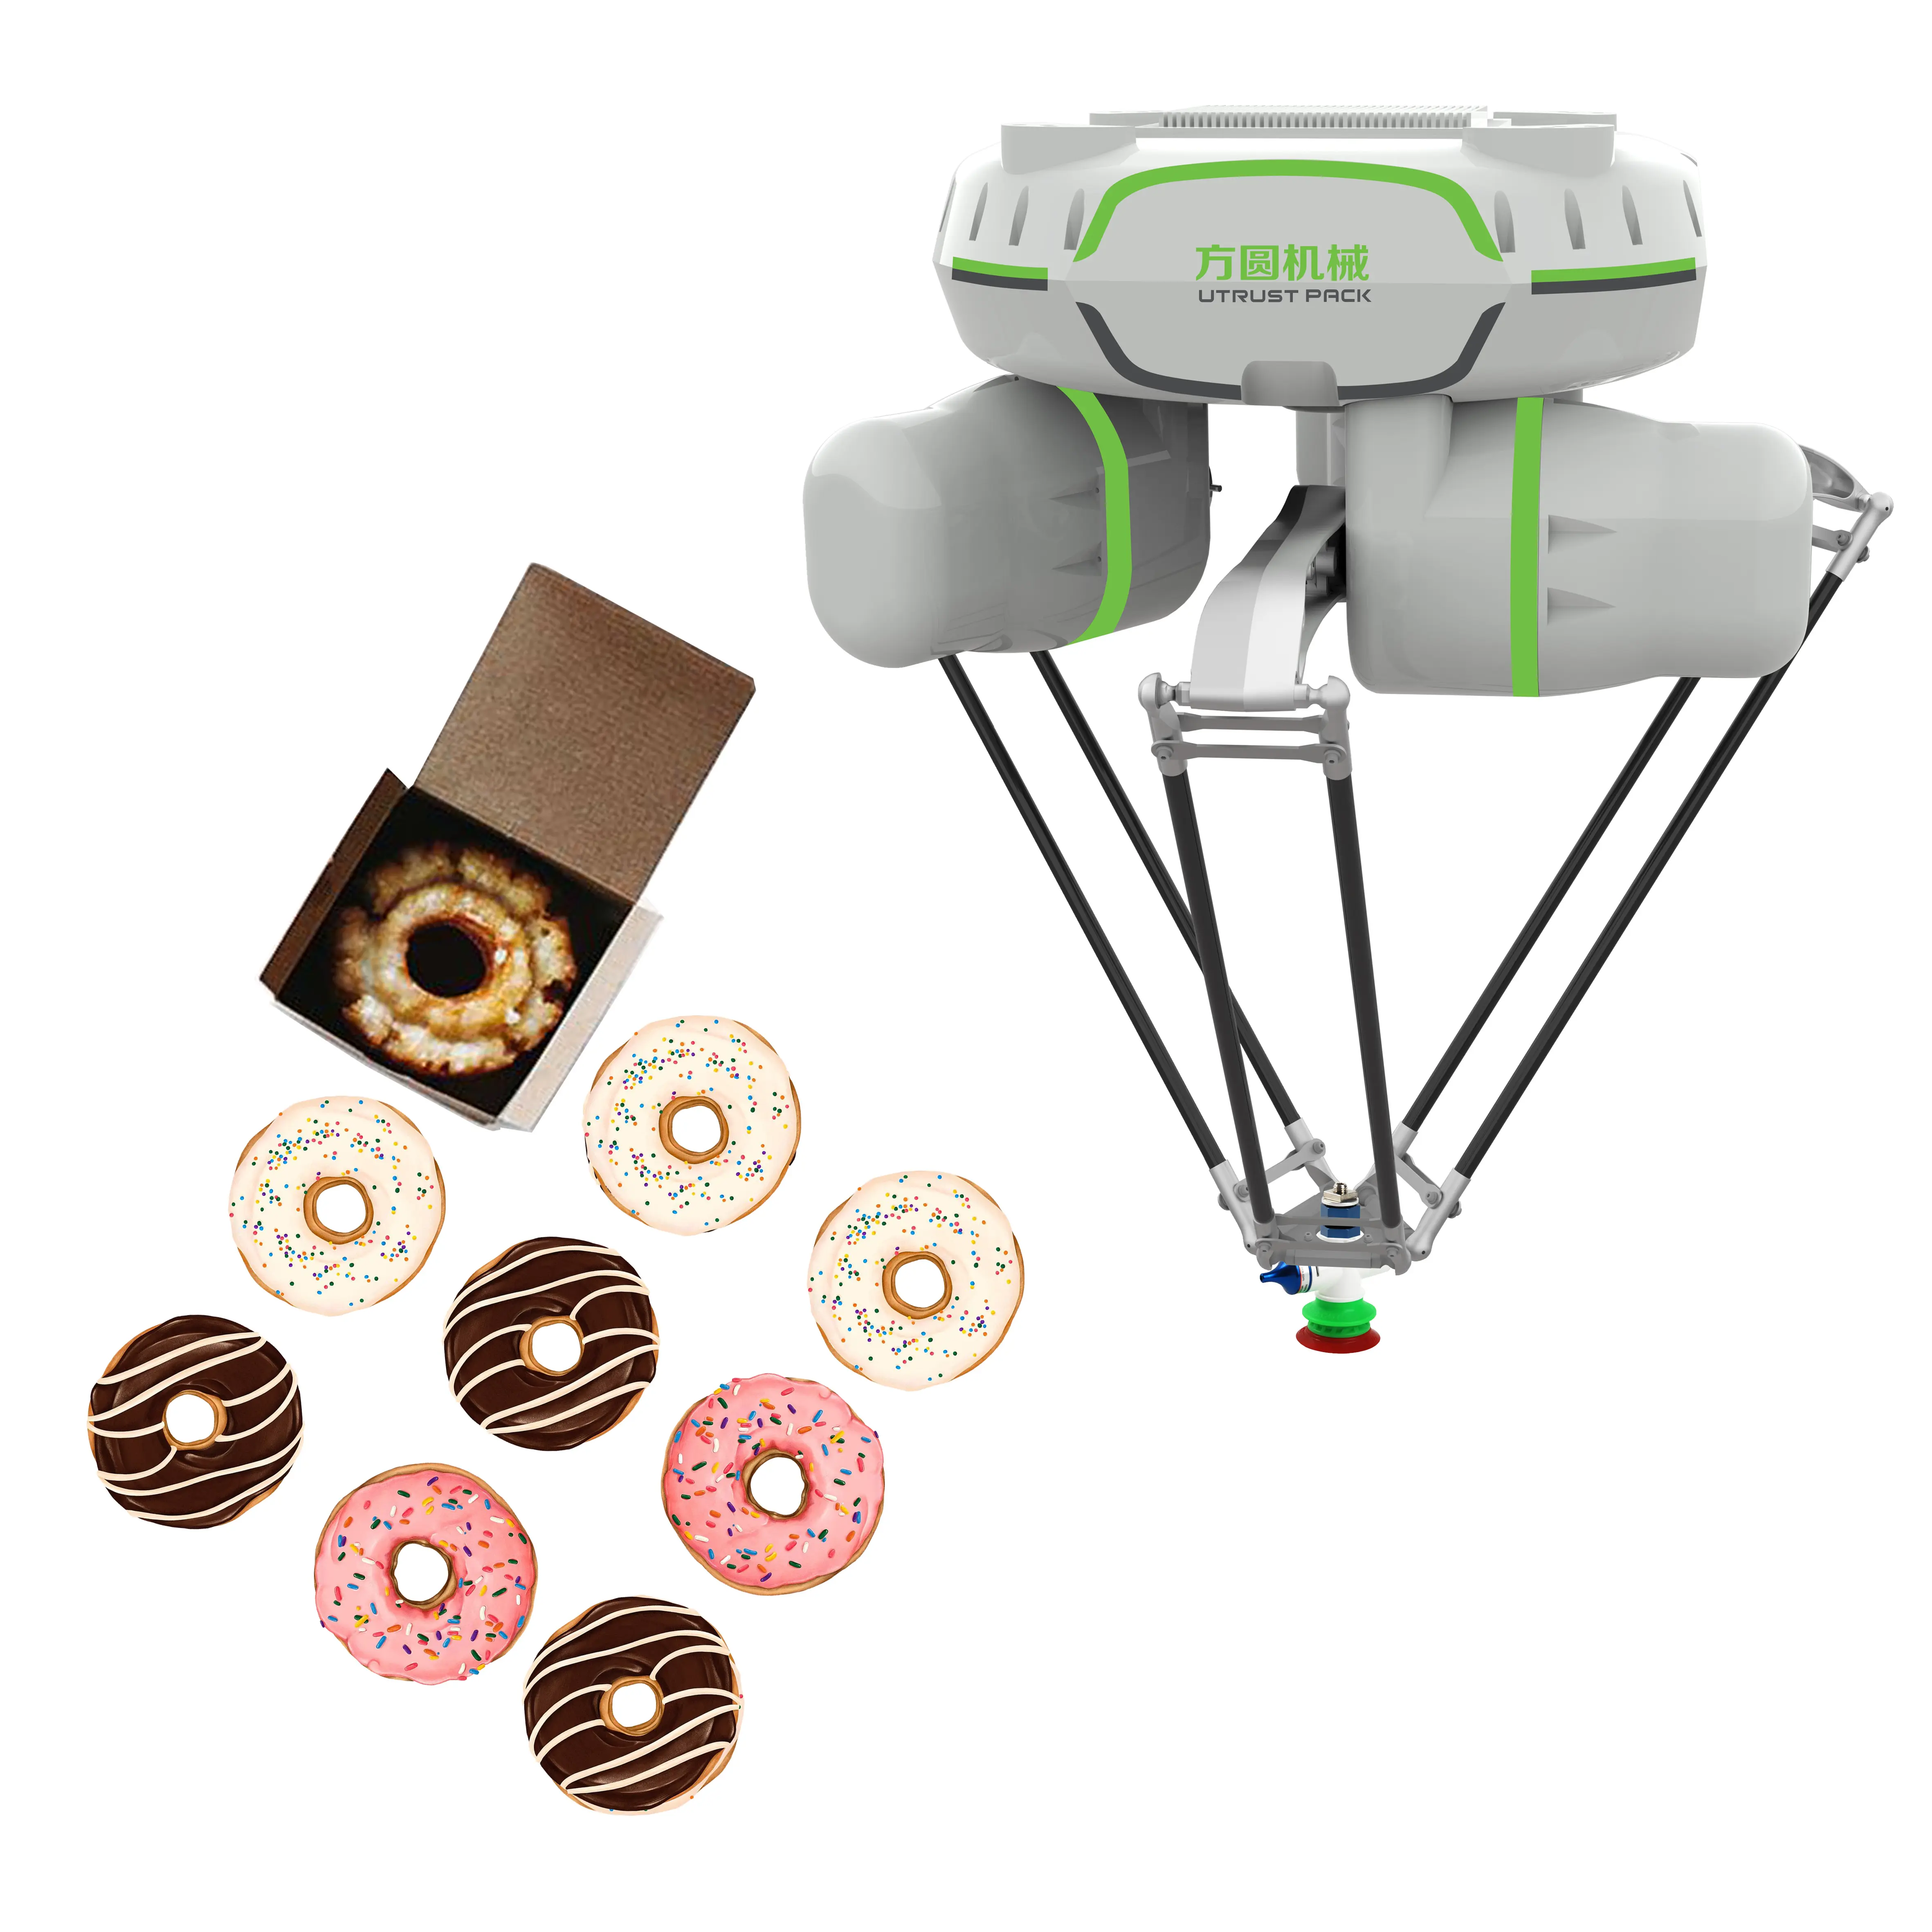 automat programmable 3+1 Axis industrial assembling sorting pick and place cookies cake donut favor boxes delta robot